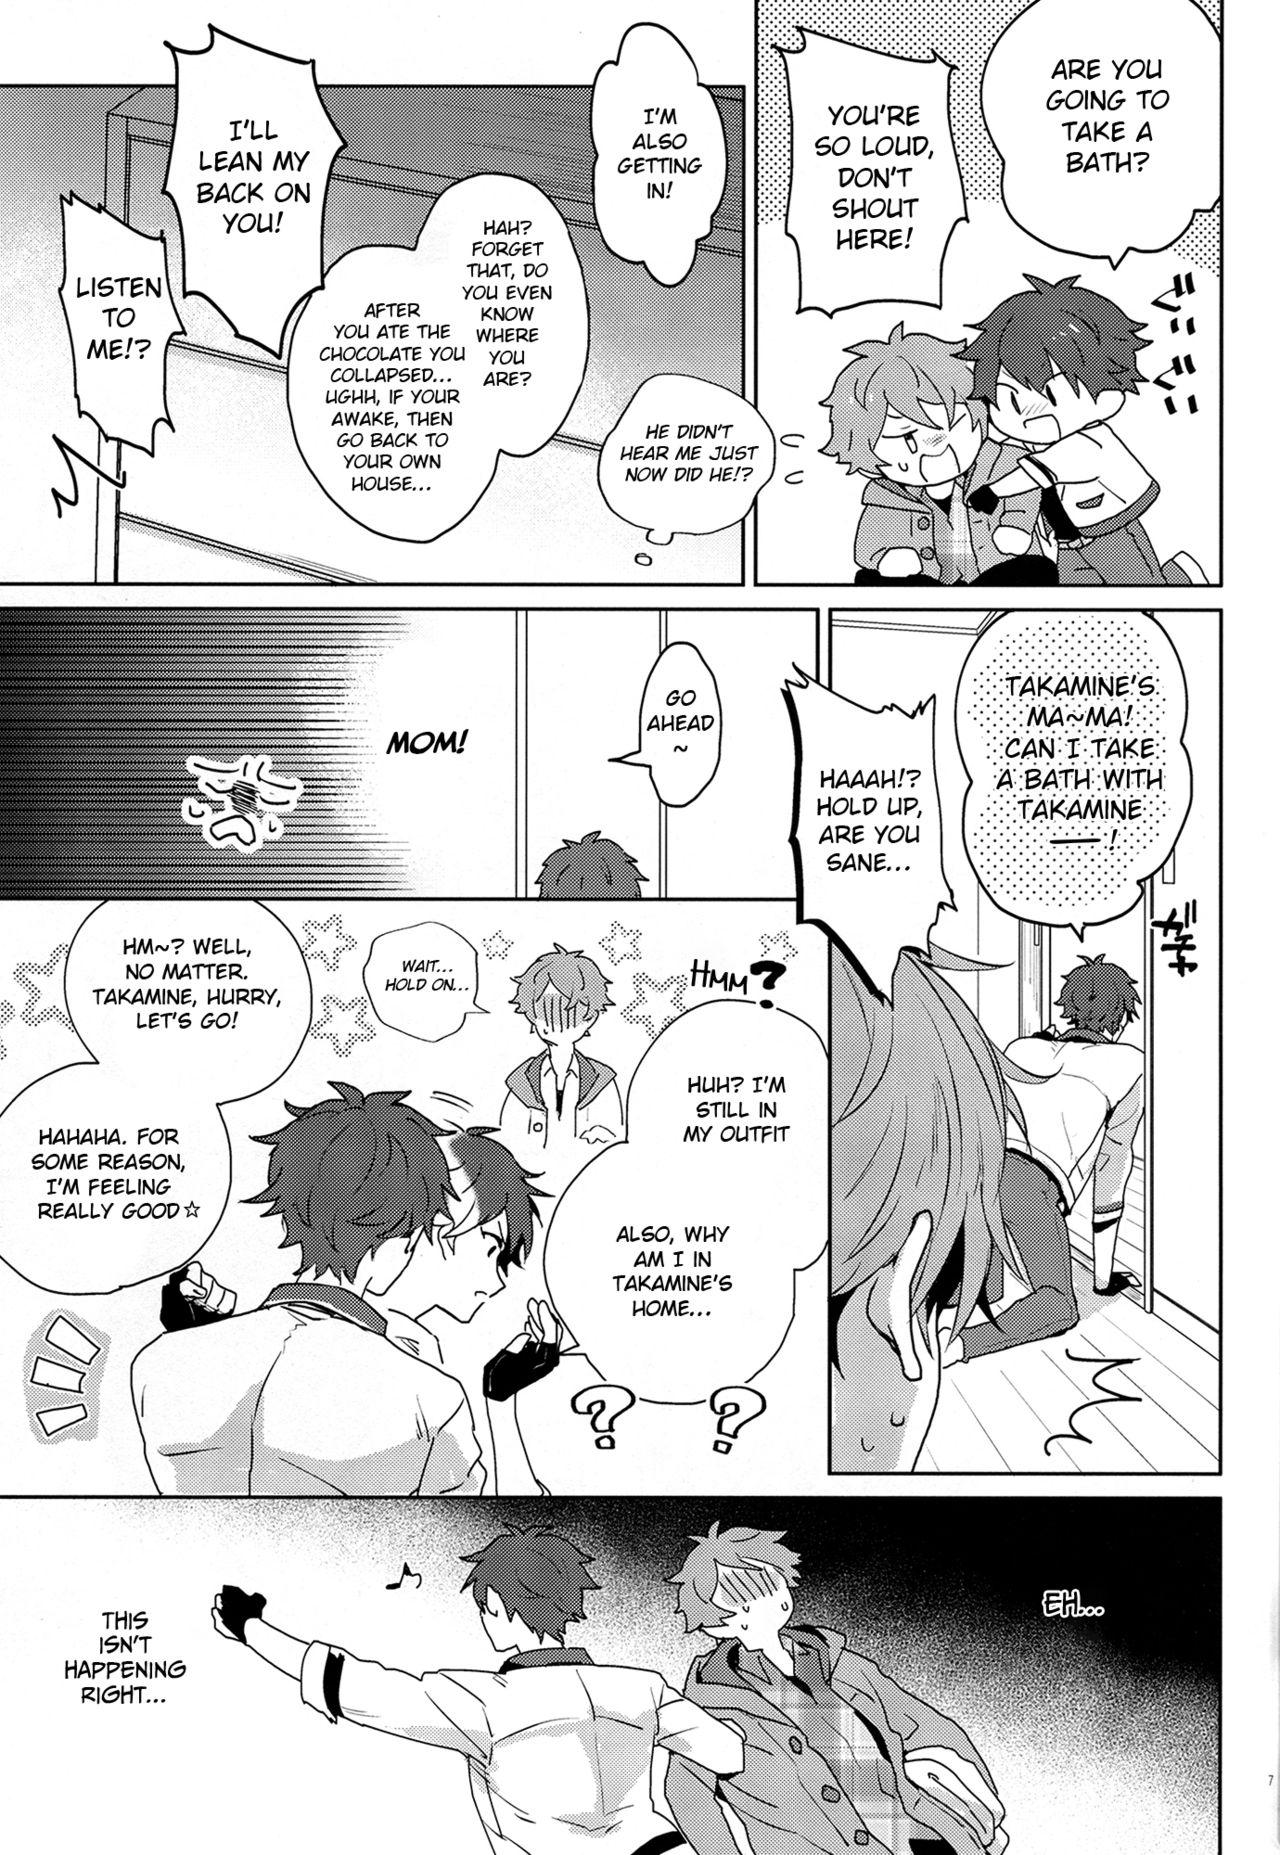 Blowjobs After the Holiday Party! - Ensemble stars Tanned - Page 7